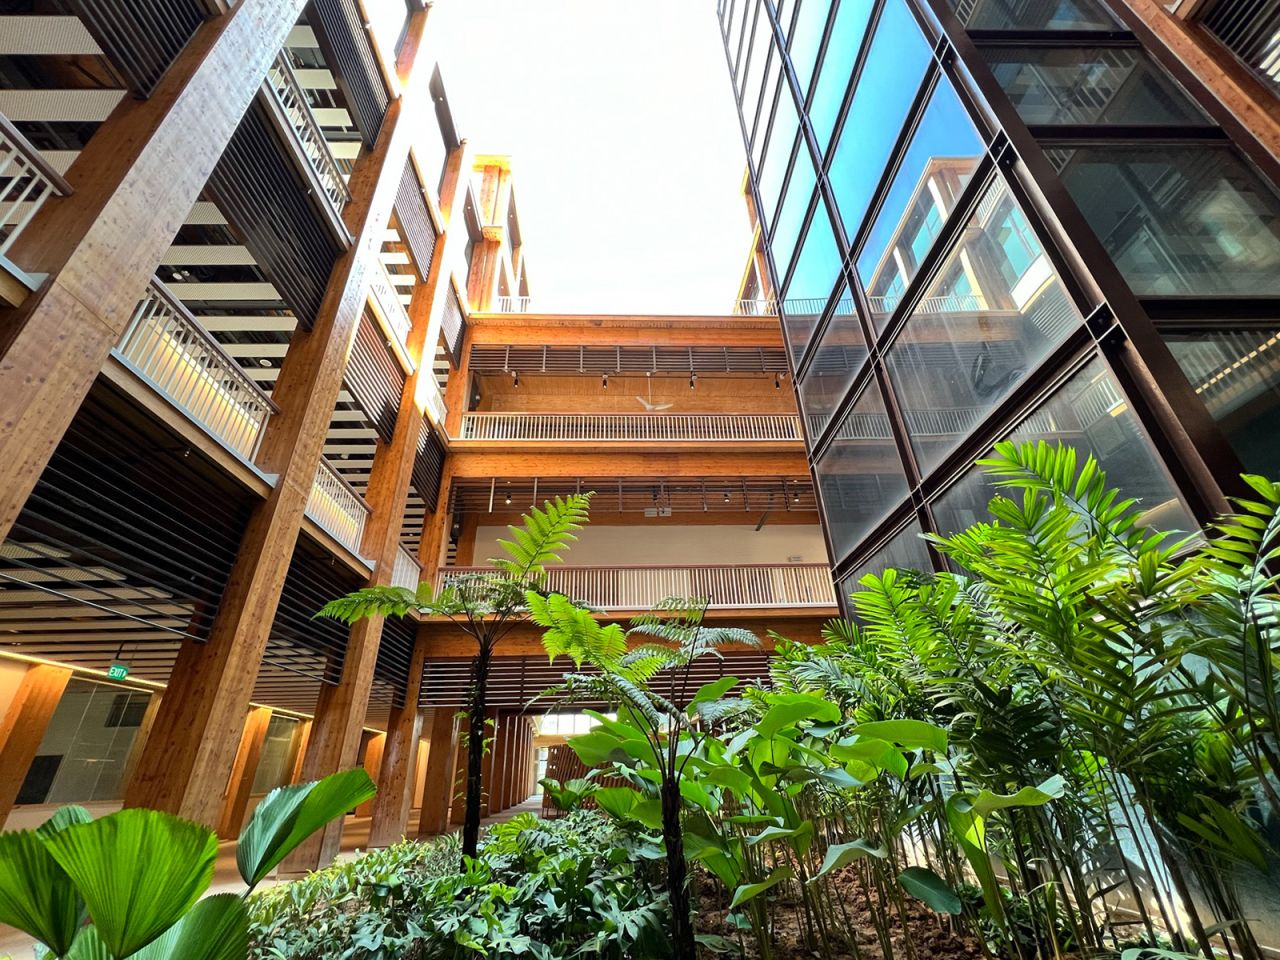 Airy terraces and sunlit atriums are found throughout the design.